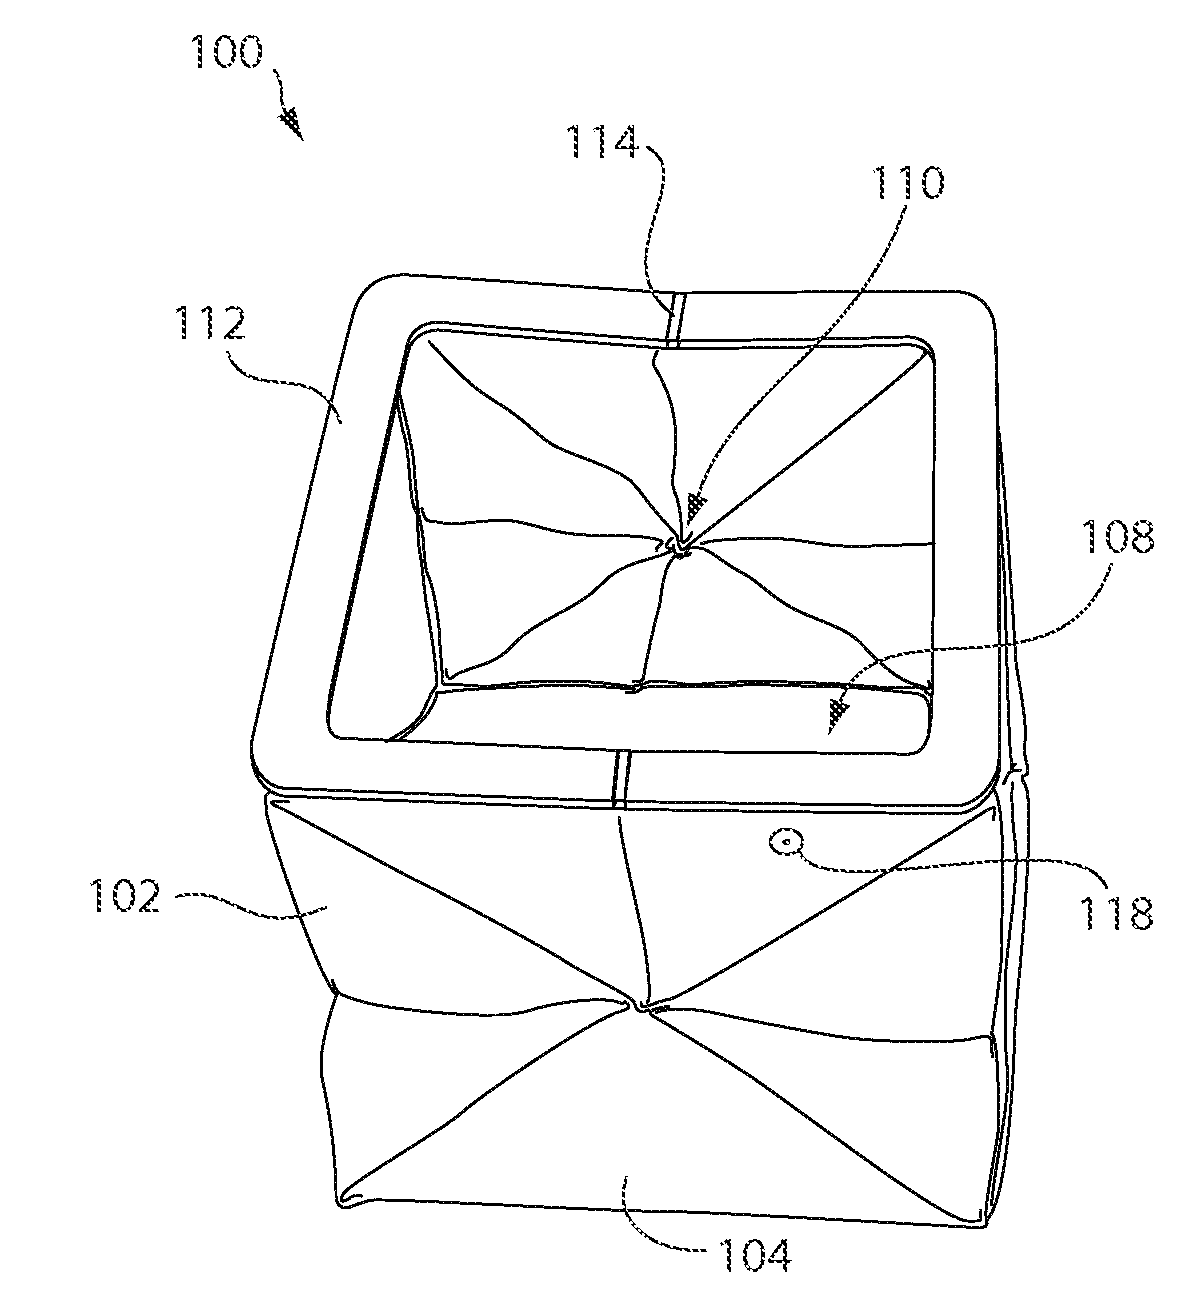 Systems and methods for waste disposal using a disposal bag with a rectangular frame